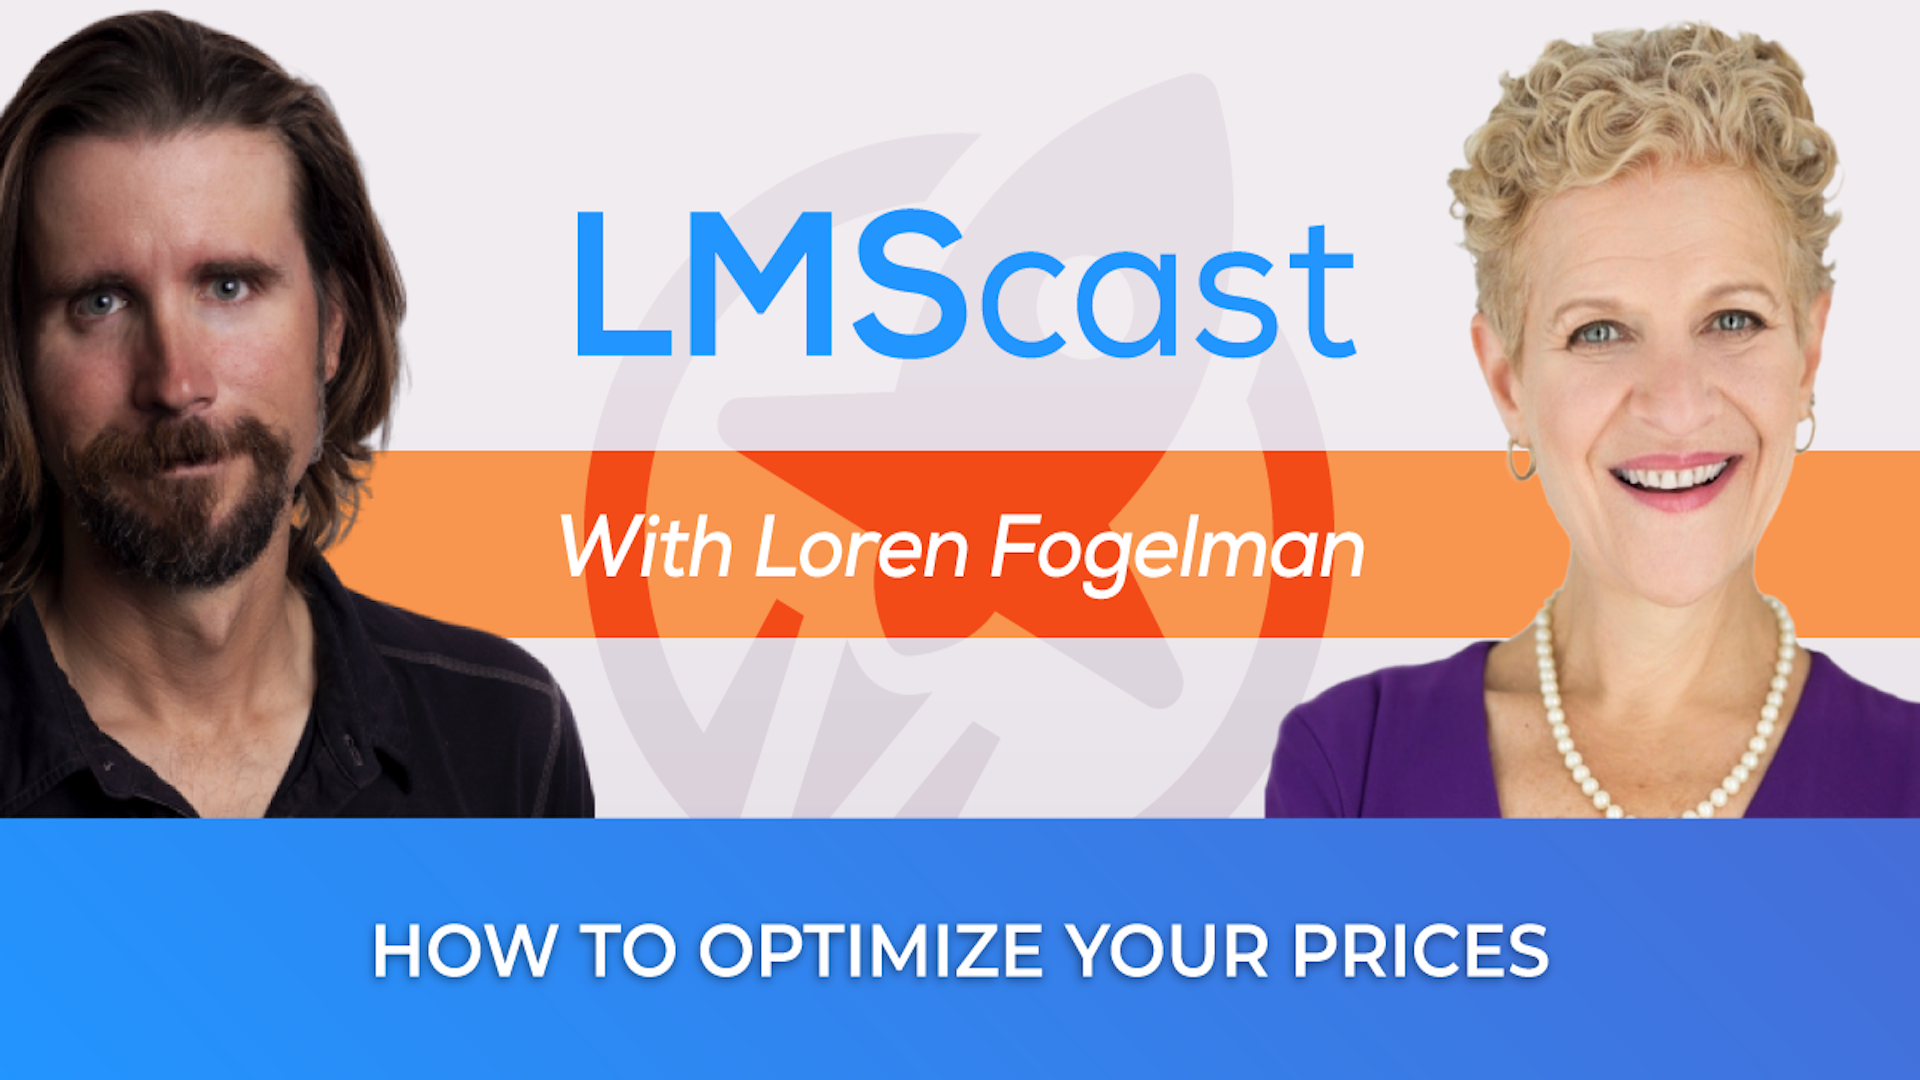 How to Optimize Your Prices with Loren Fogelman